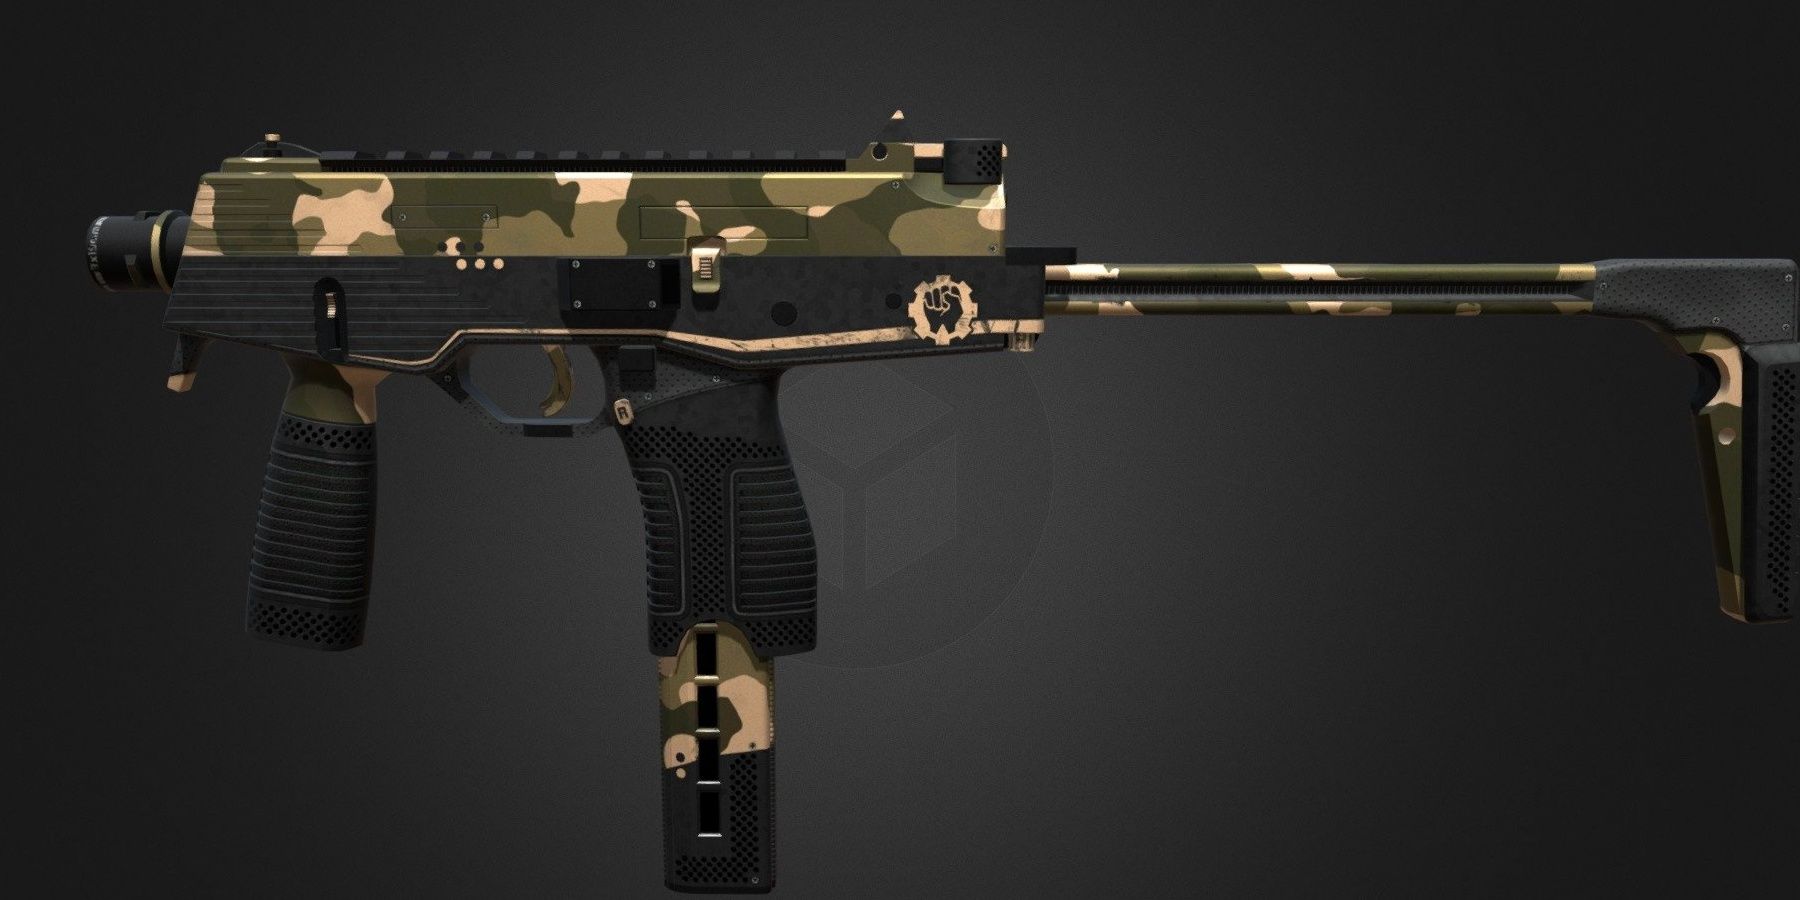 The MP9 in Counter-Strike: Global Offensive